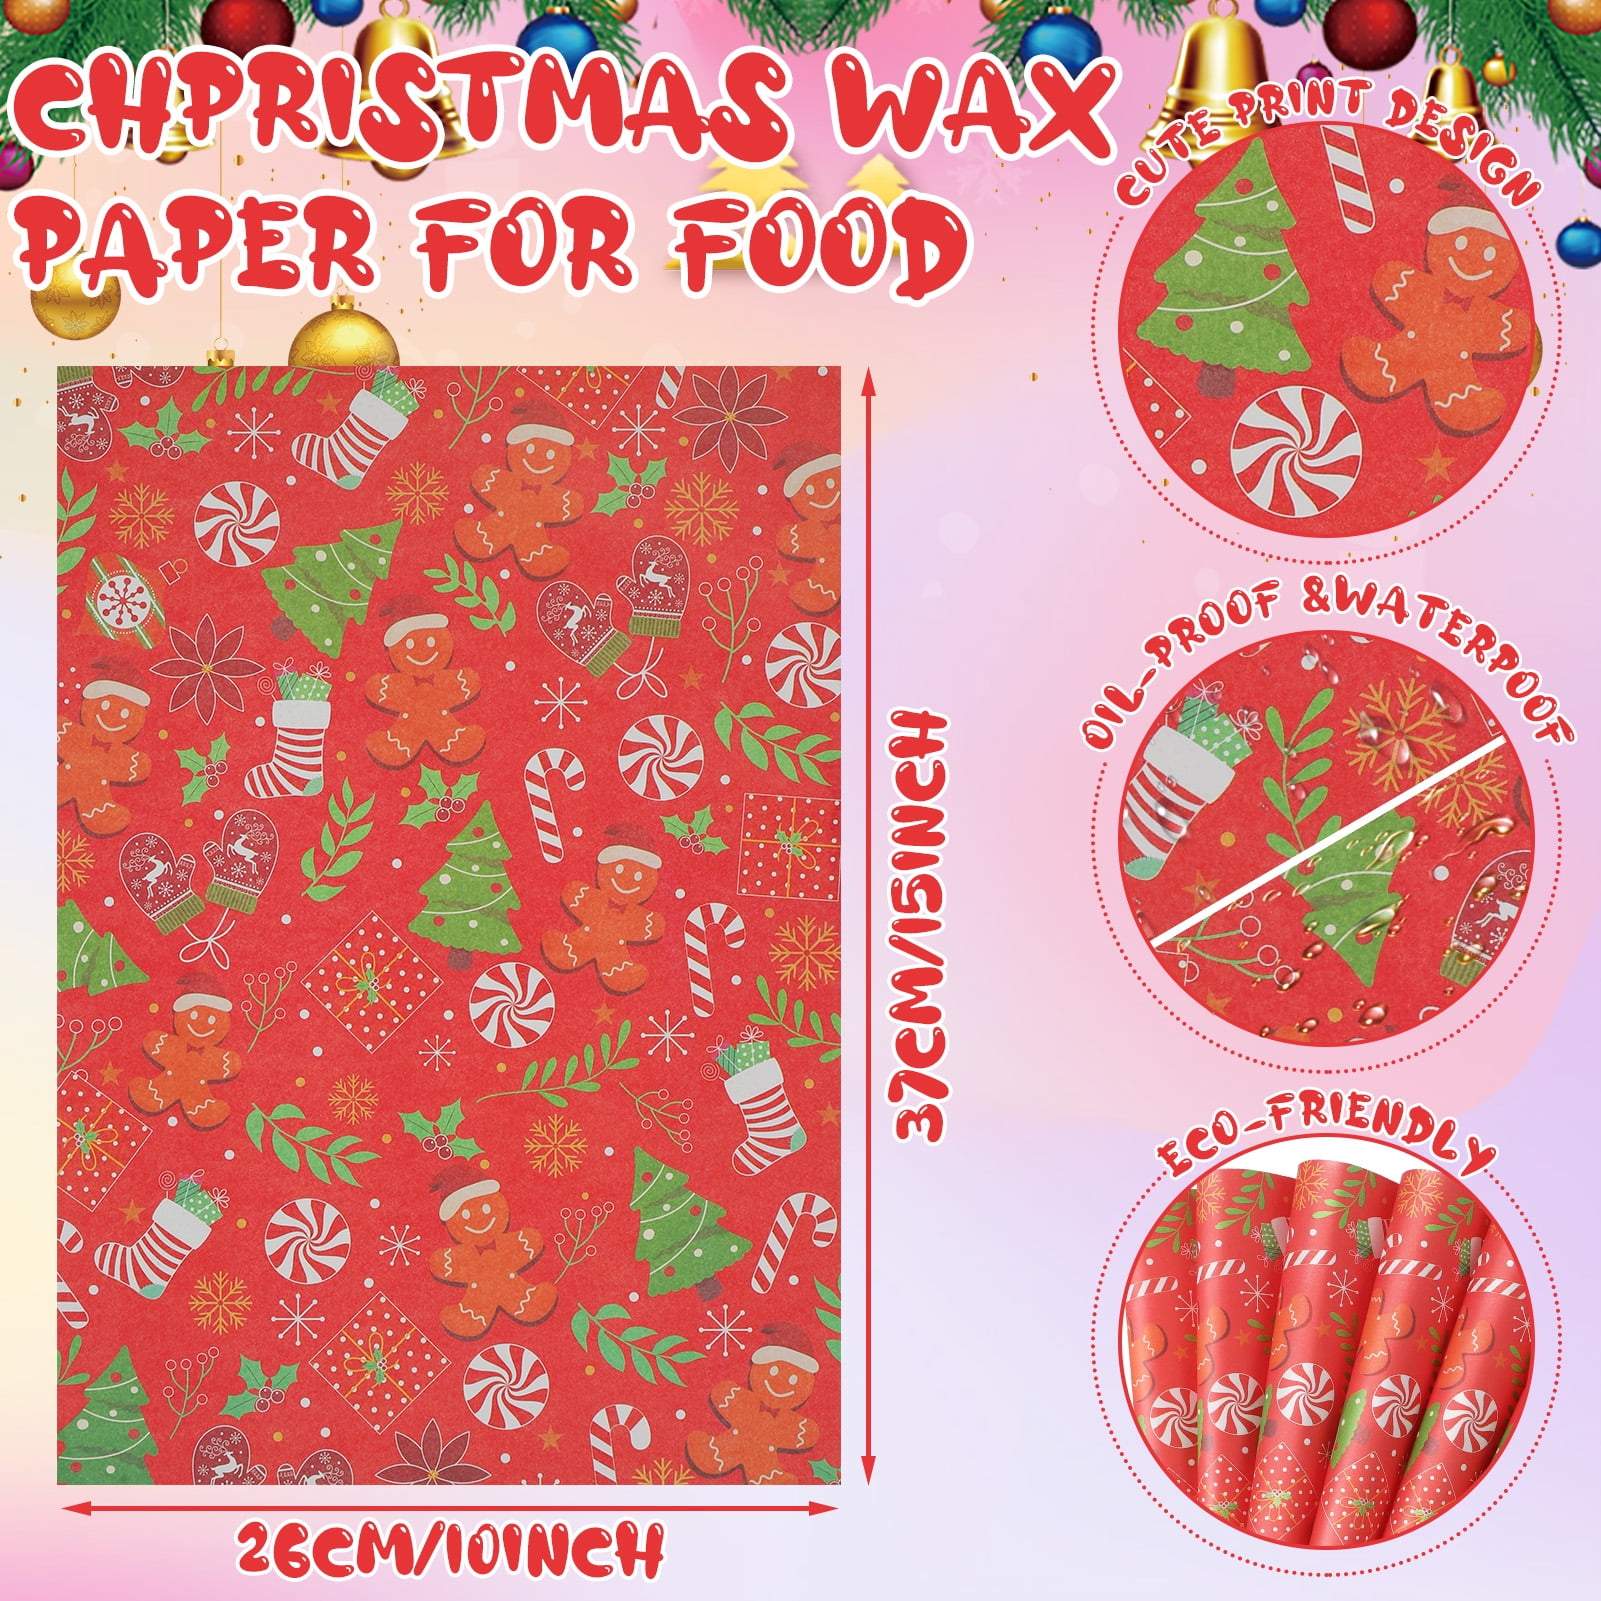 sorkwo 150 Pcs Christmas Wax Paper Sheets Sandwich Wrap Paper Wrapping  Tissue Food Picnic Paper for Food Basket Liner